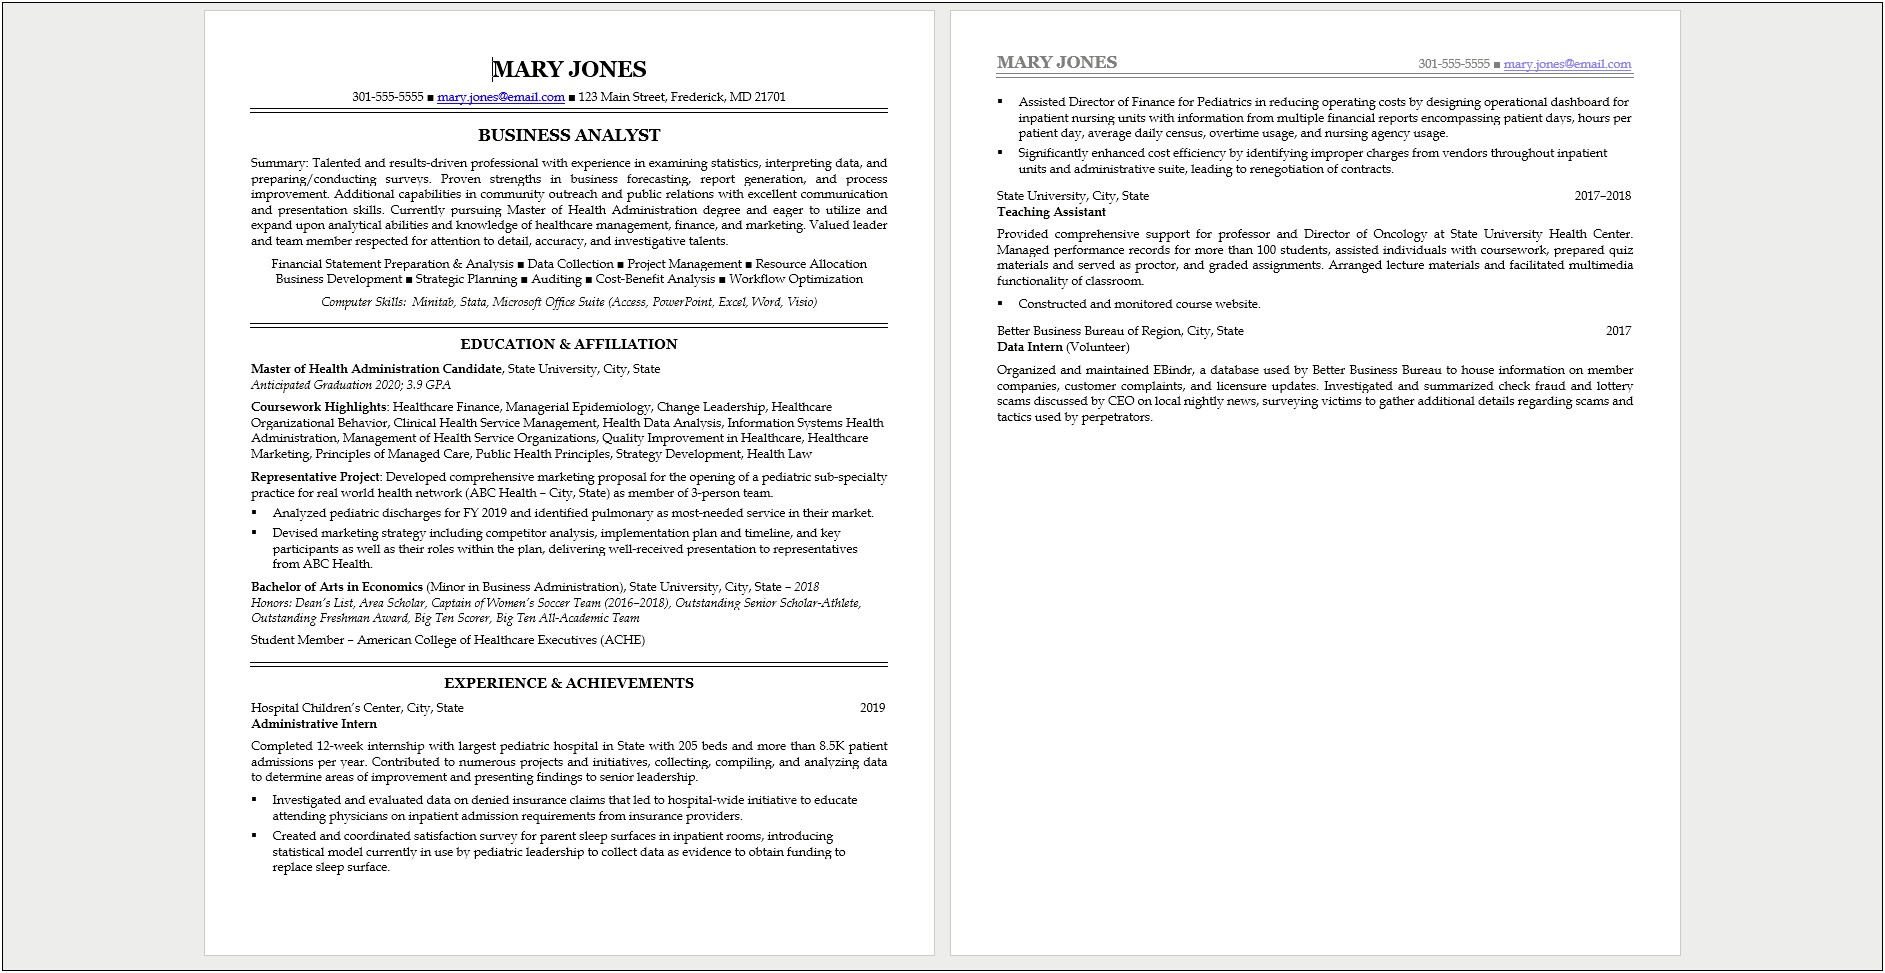 Resume Summary Statement For Recent Graduate In Business